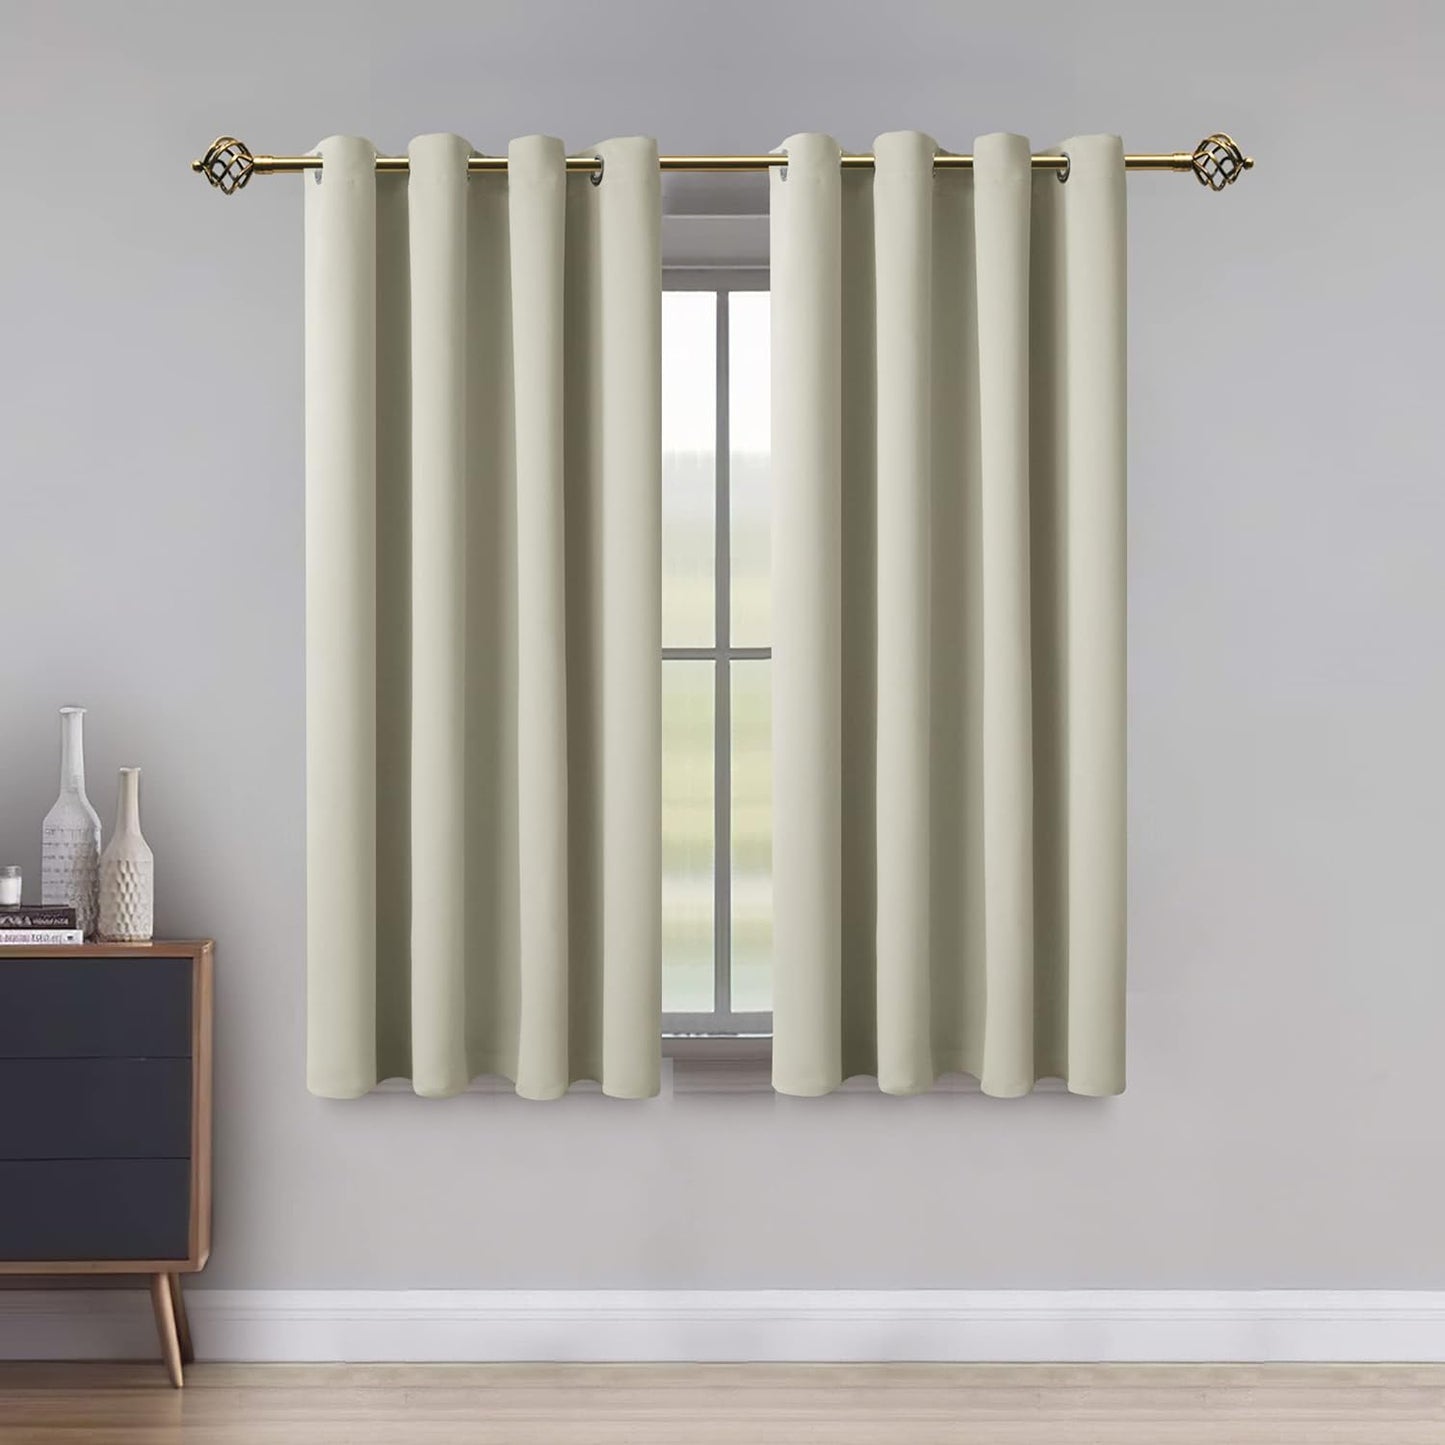 LUSHLEAF Blackout Curtains for Bedroom, Solid Thermal Insulated with Grommet Noise Reduction Window Drapes, Room Darkening Curtains for Living Room, 2 Panels, 52 X 63 Inch Grey  SHEEROOM Light Beige 52 X 45 Inch 